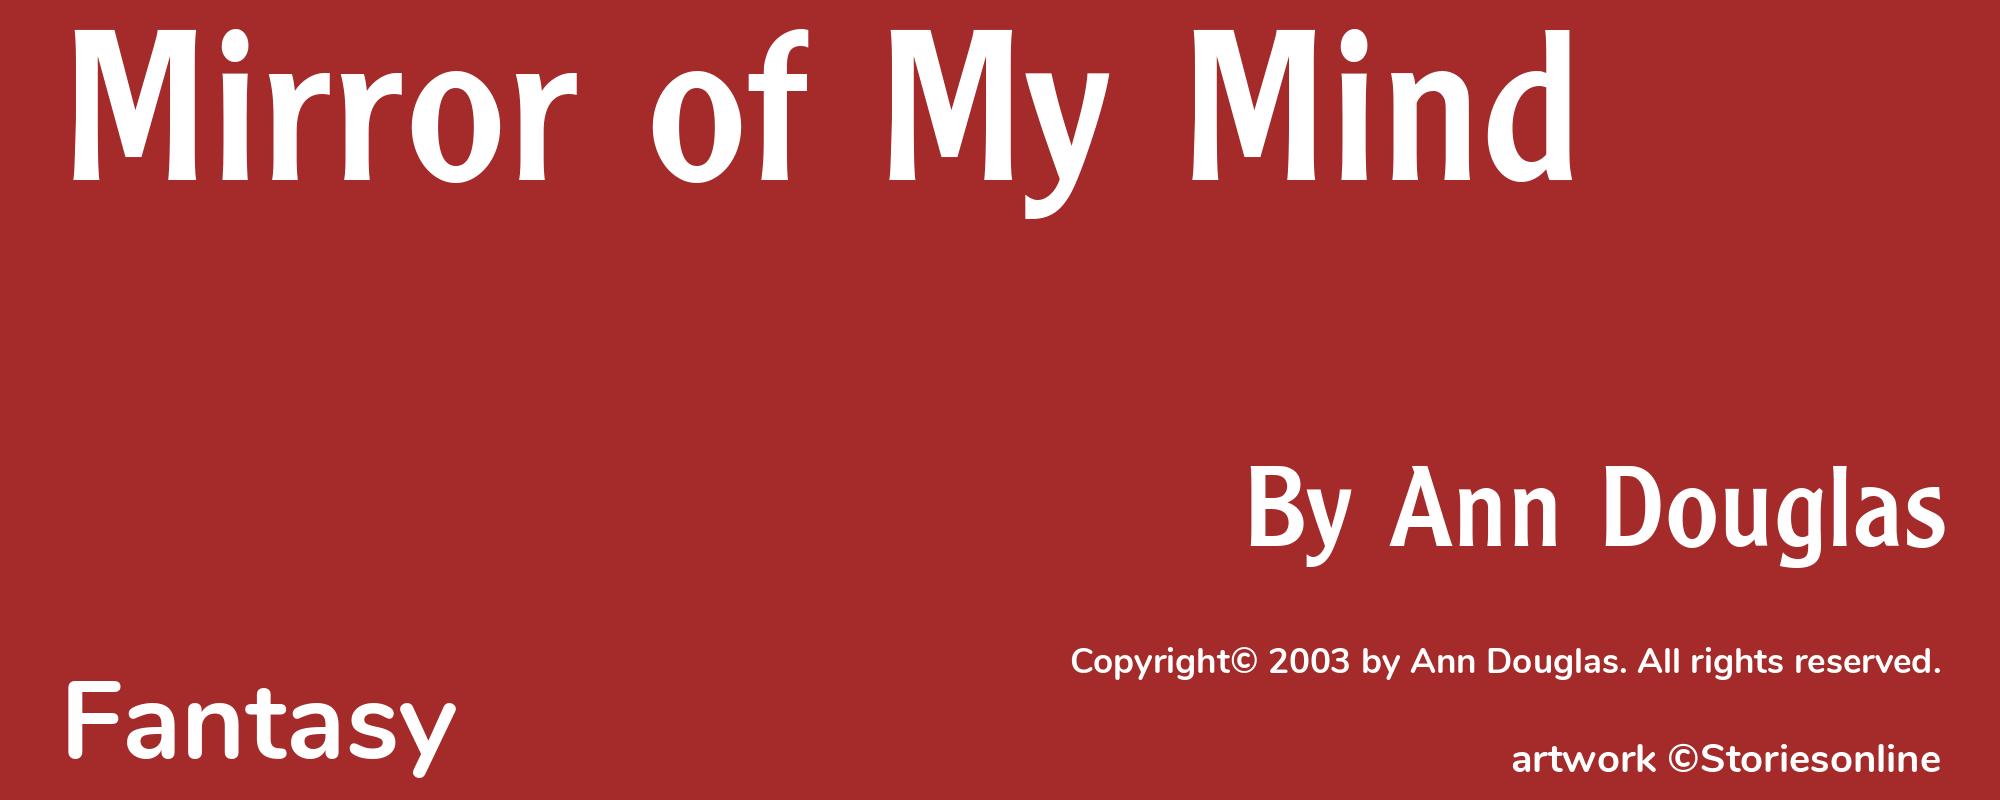 Mirror of My Mind - Cover